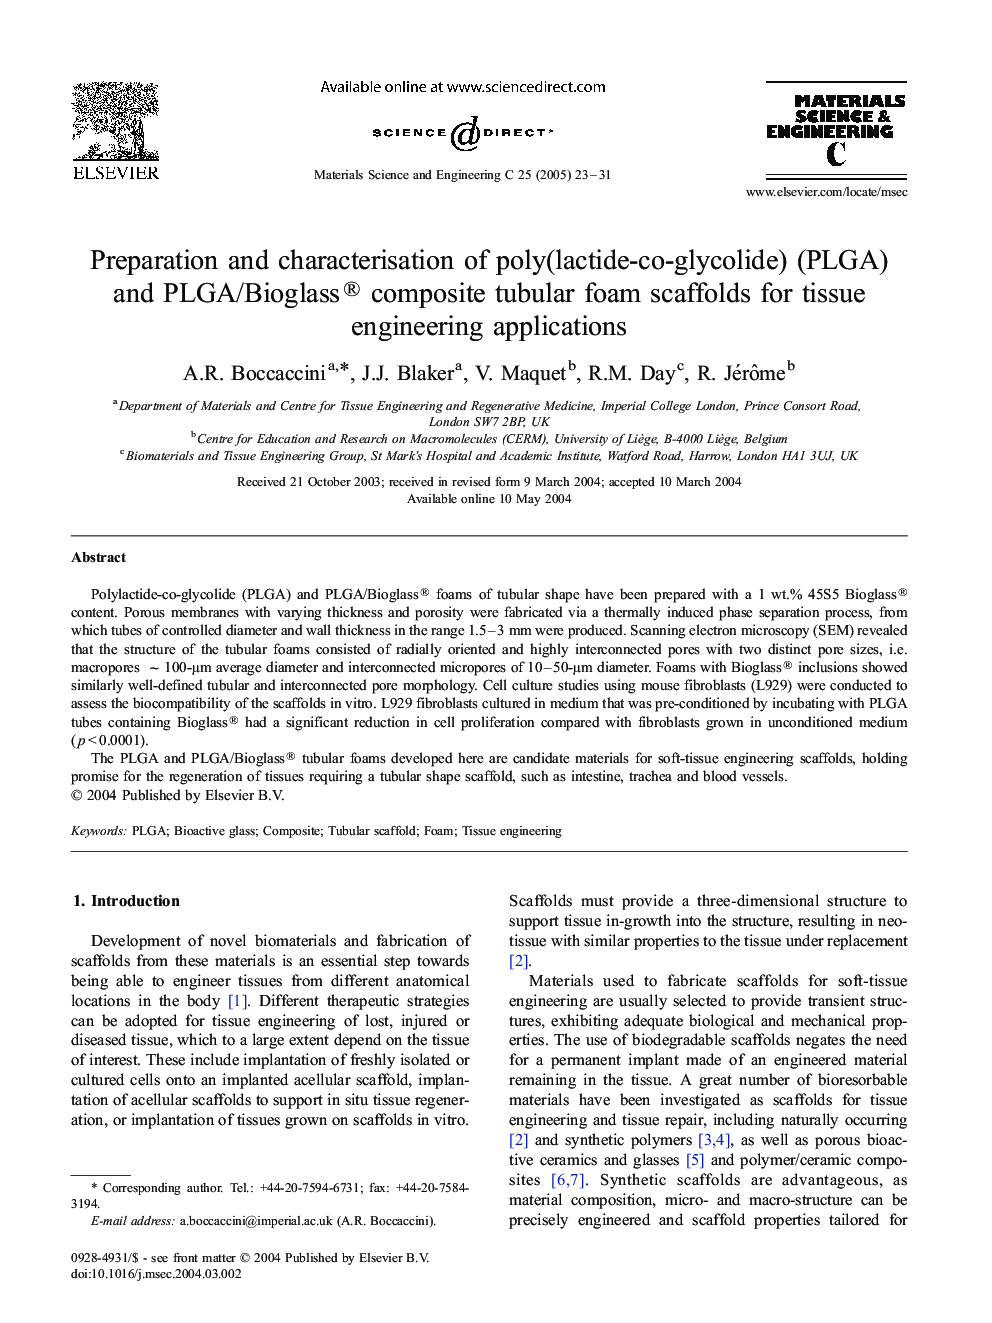 Preparation and characterisation of poly(lactide-co-glycolide) (PLGA) and PLGA/Bioglass® composite tubular foam scaffolds for tissue engineering applications